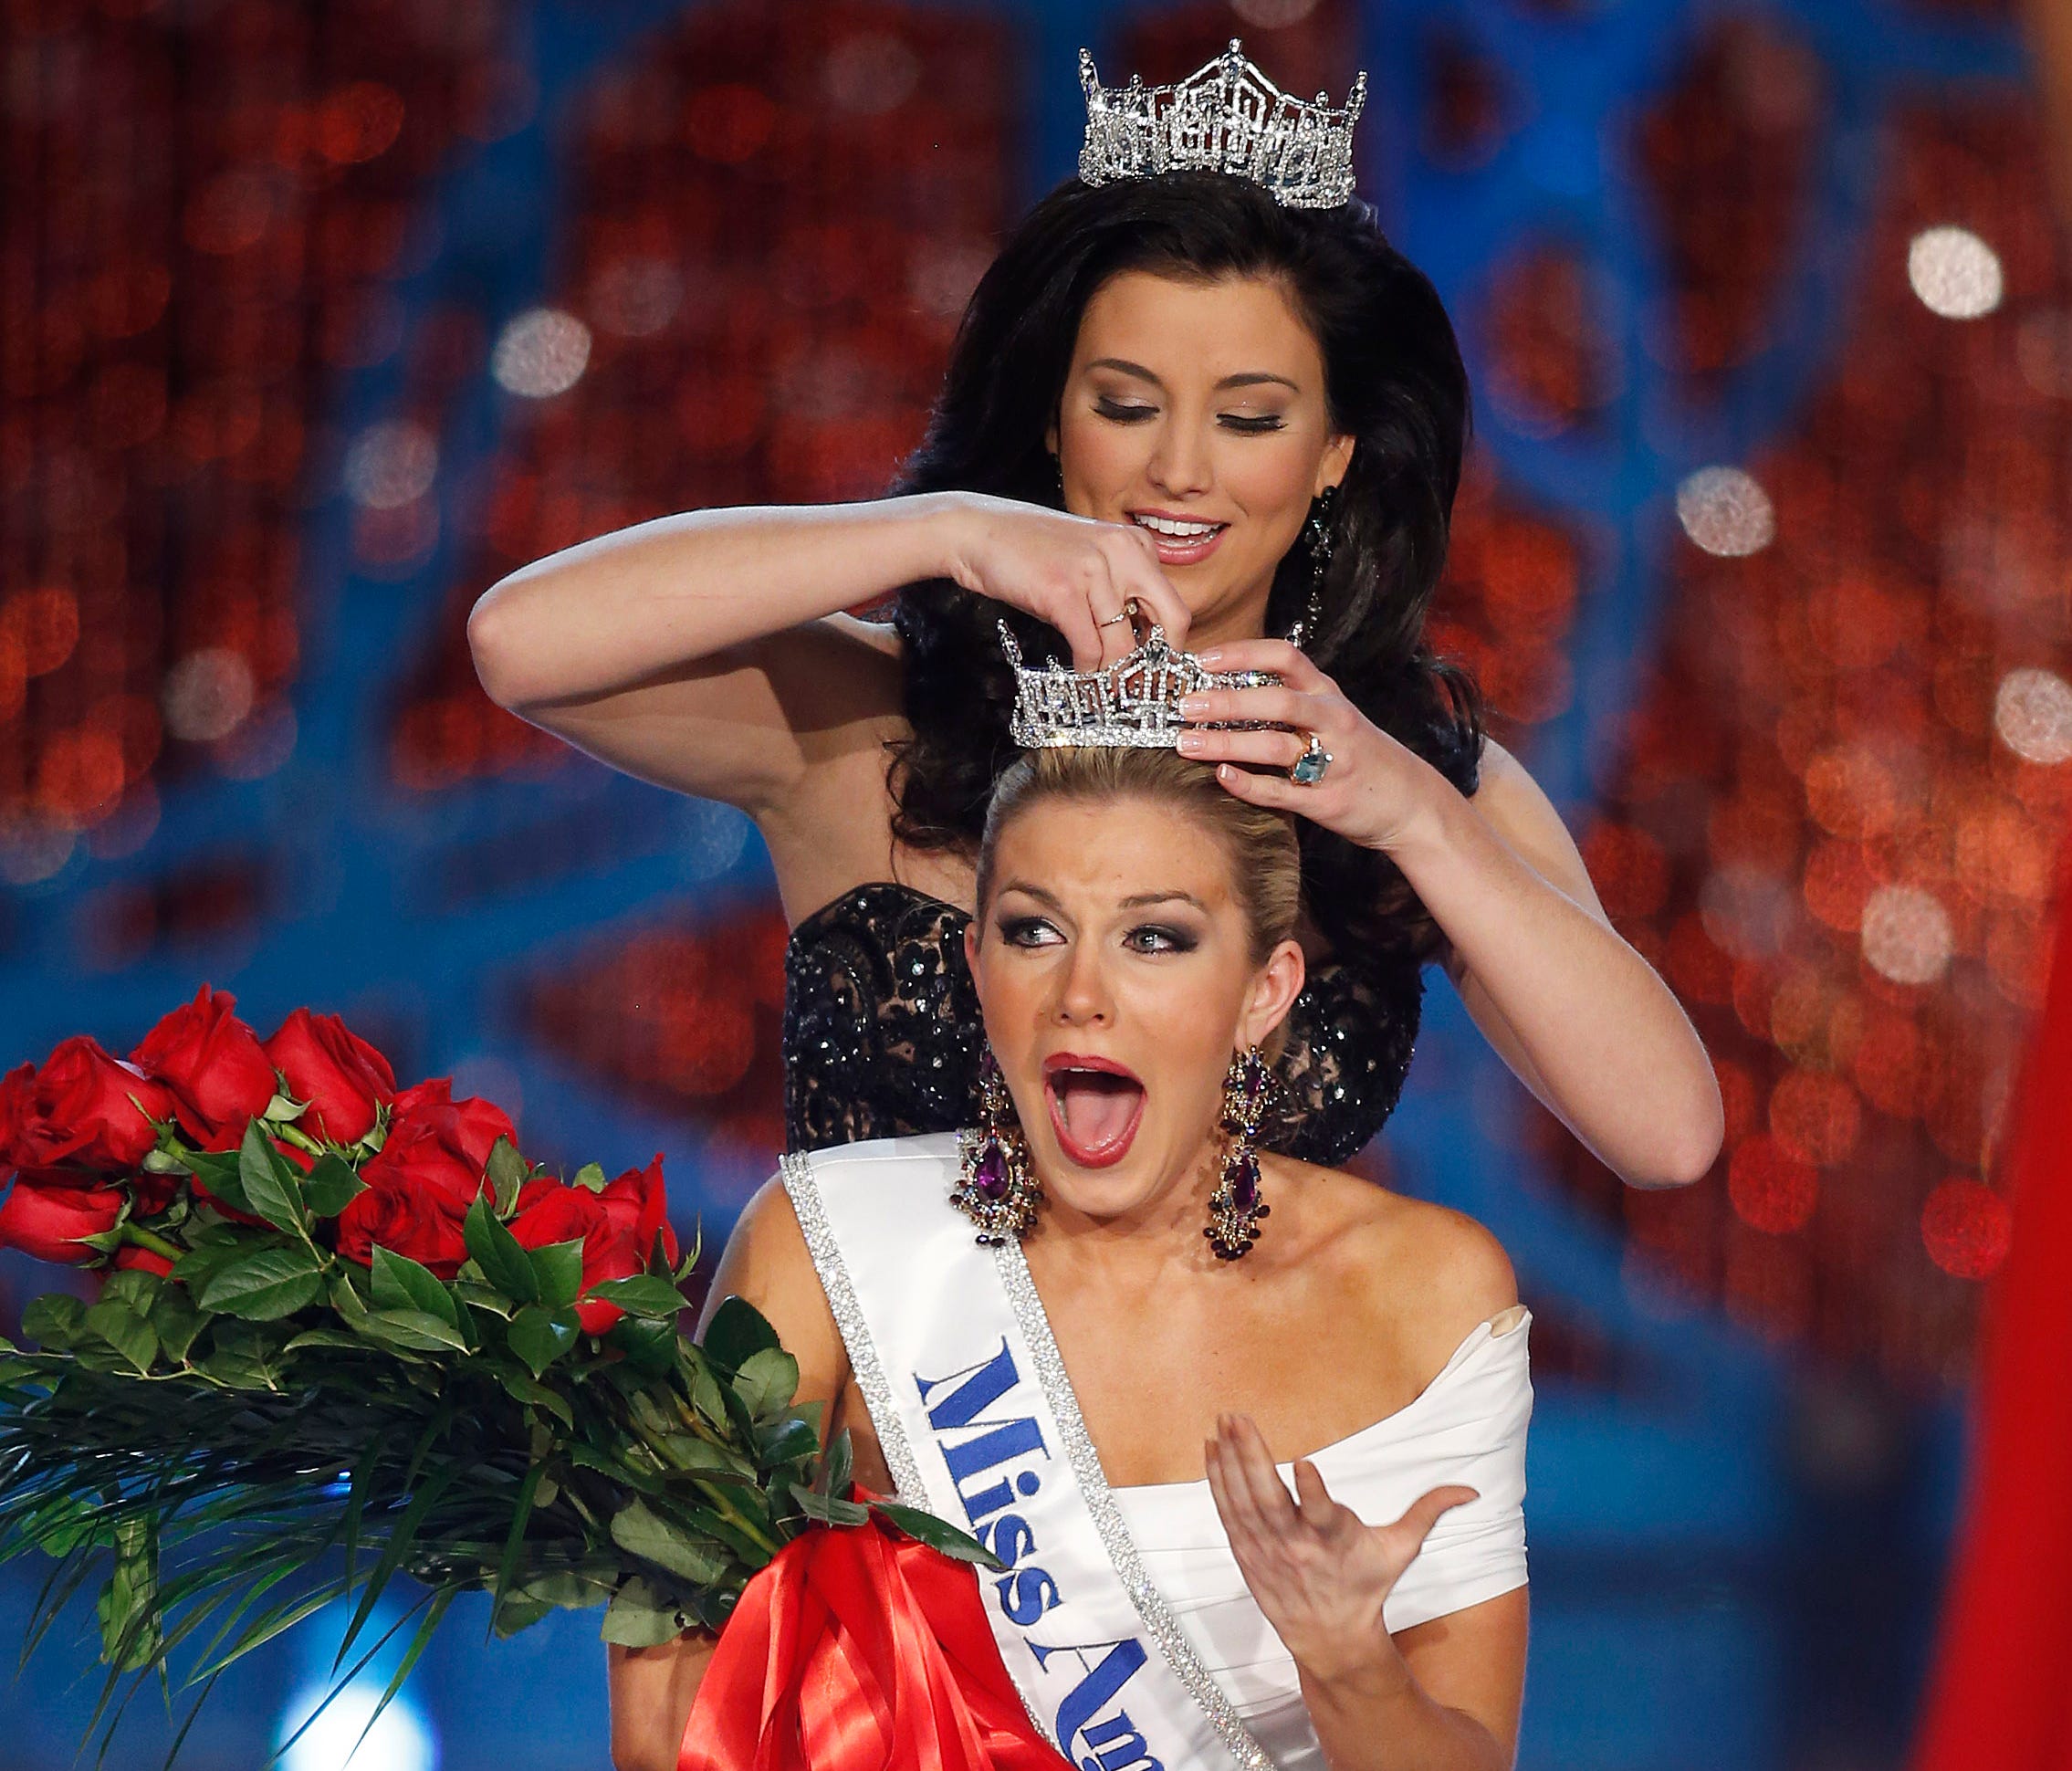 Miss New York Mallory Hagan is crowned Miss America 2013 by Miss America 2012 Laura Kaeppeler on Jan. 12, 2013.